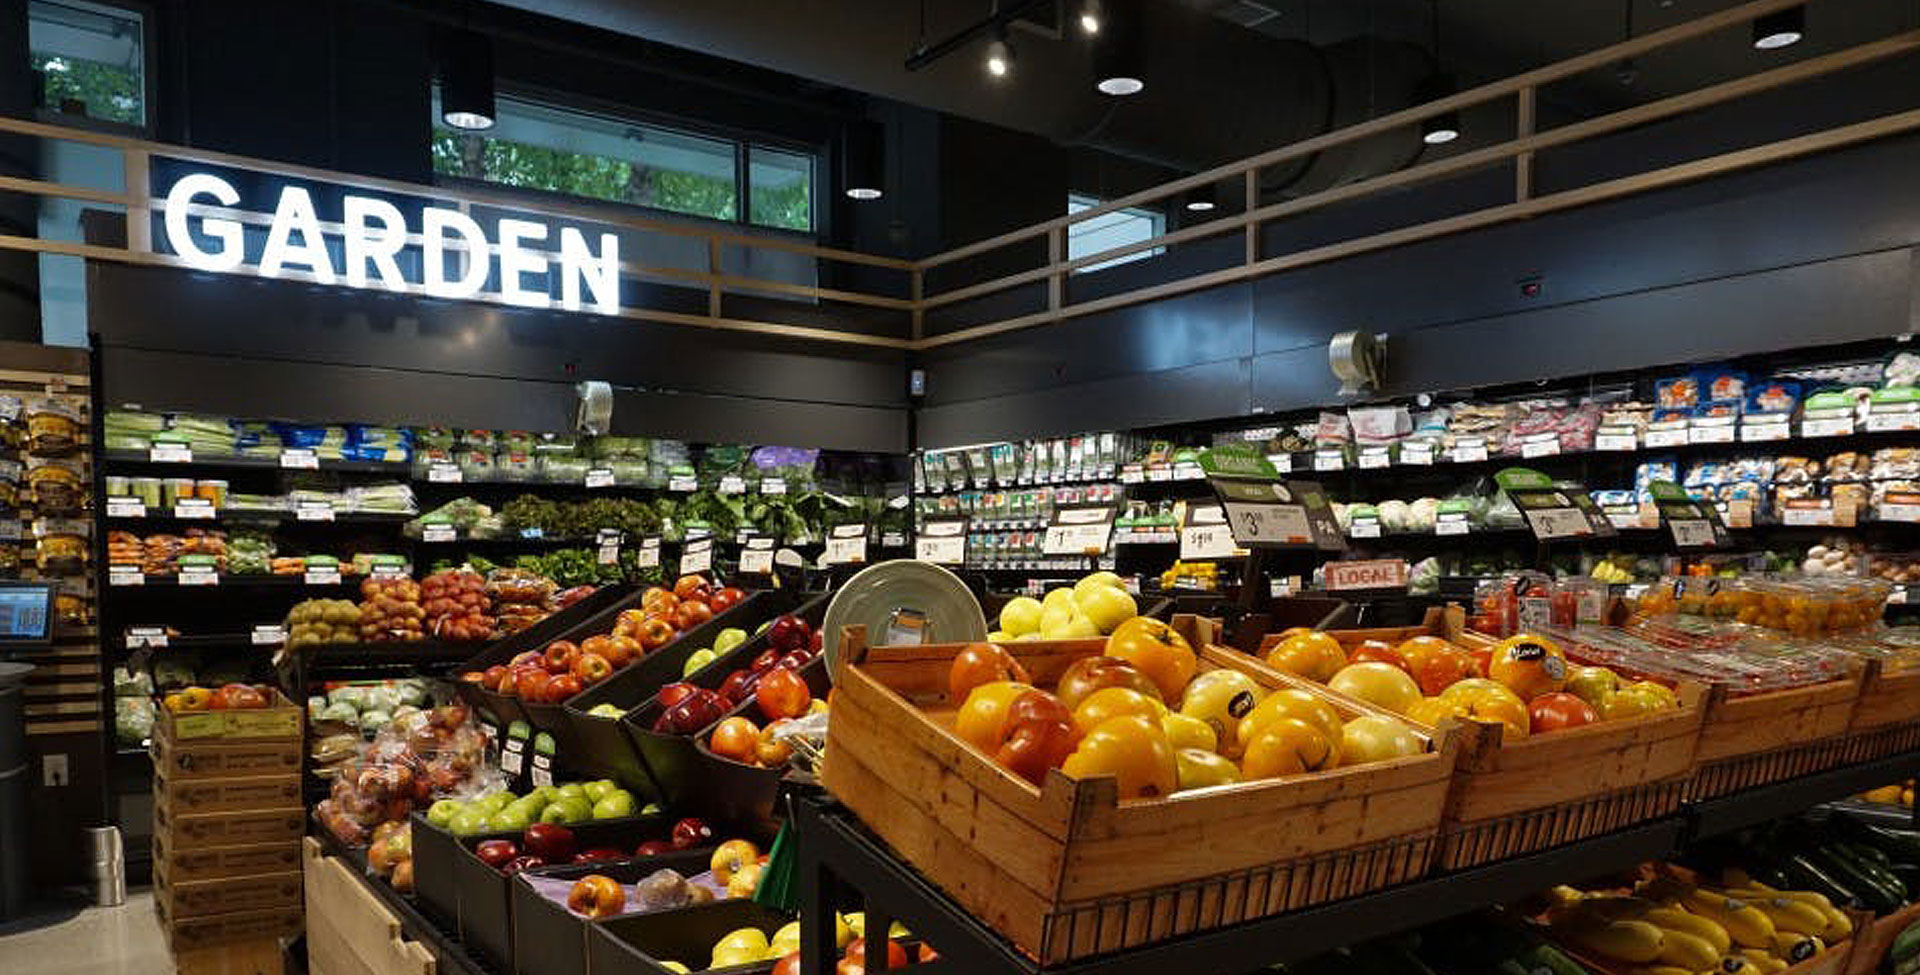 Giant's Heirloom Market innovative fruit and vegetable retail department